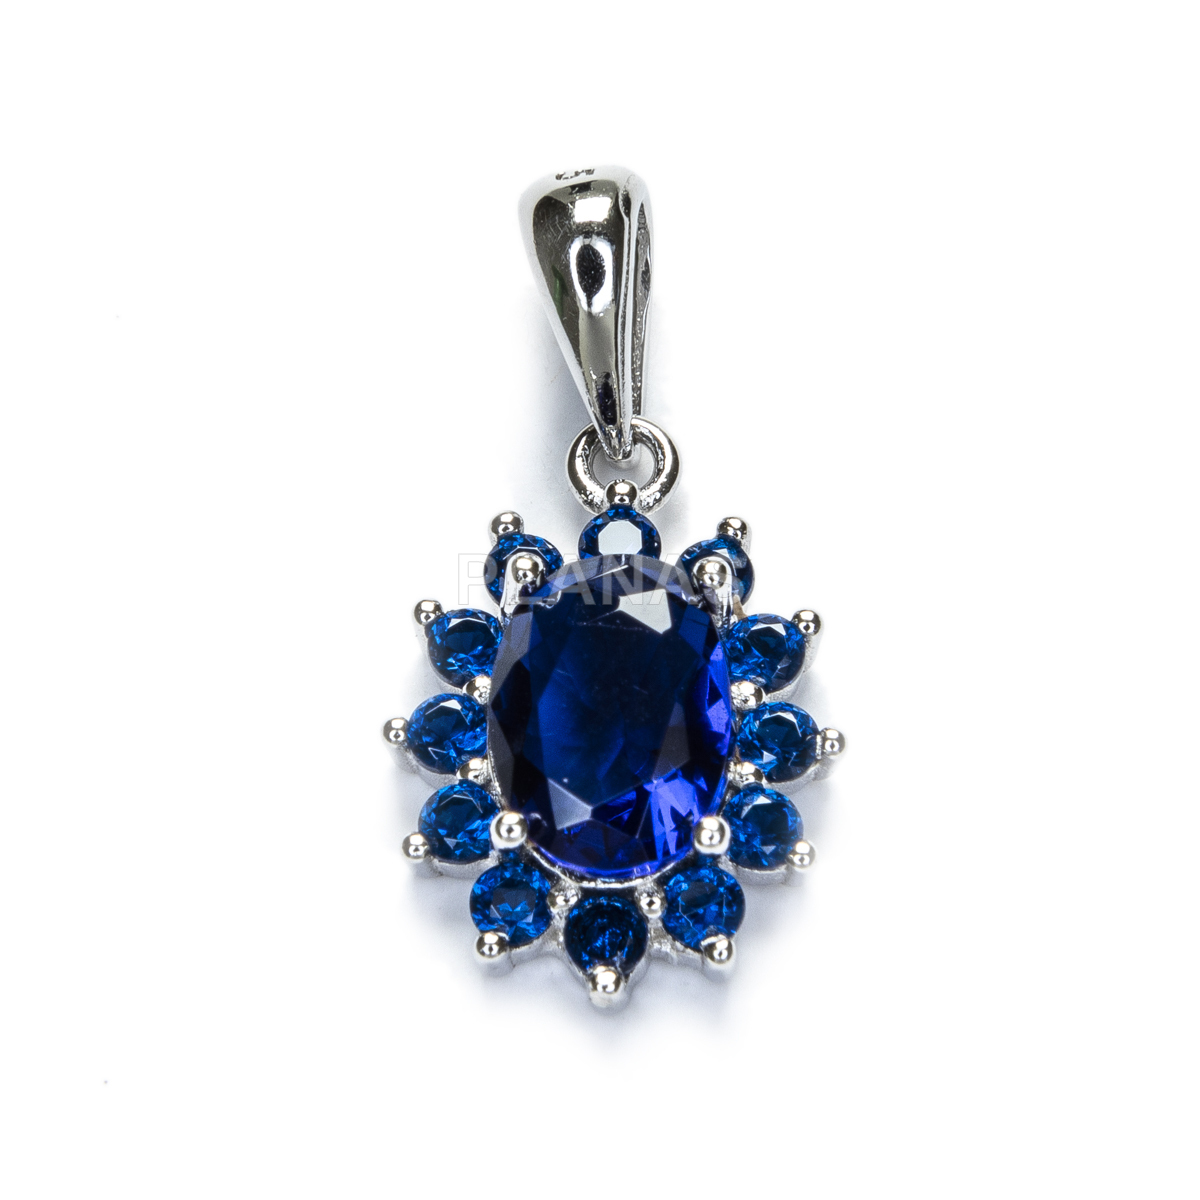 Pendant in rhodium-plated sterling silver and blue zircons.